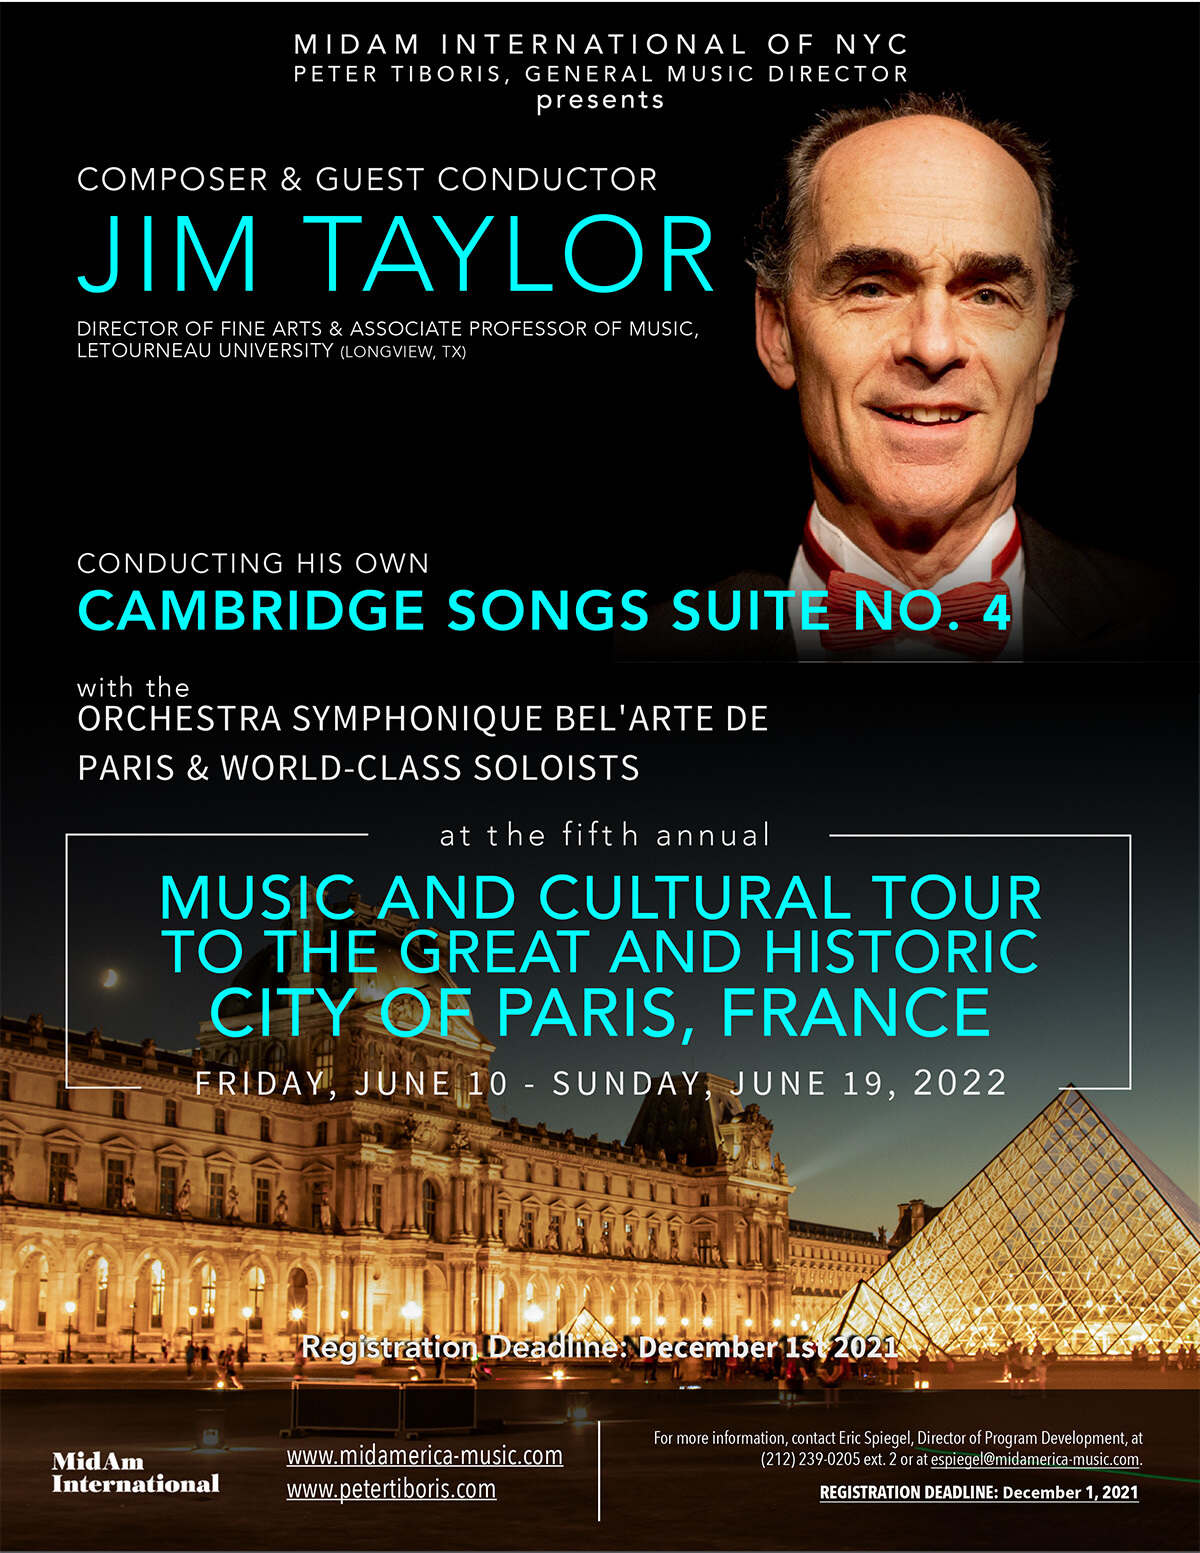 Dr. Jim Taylor, Florence Itinerary